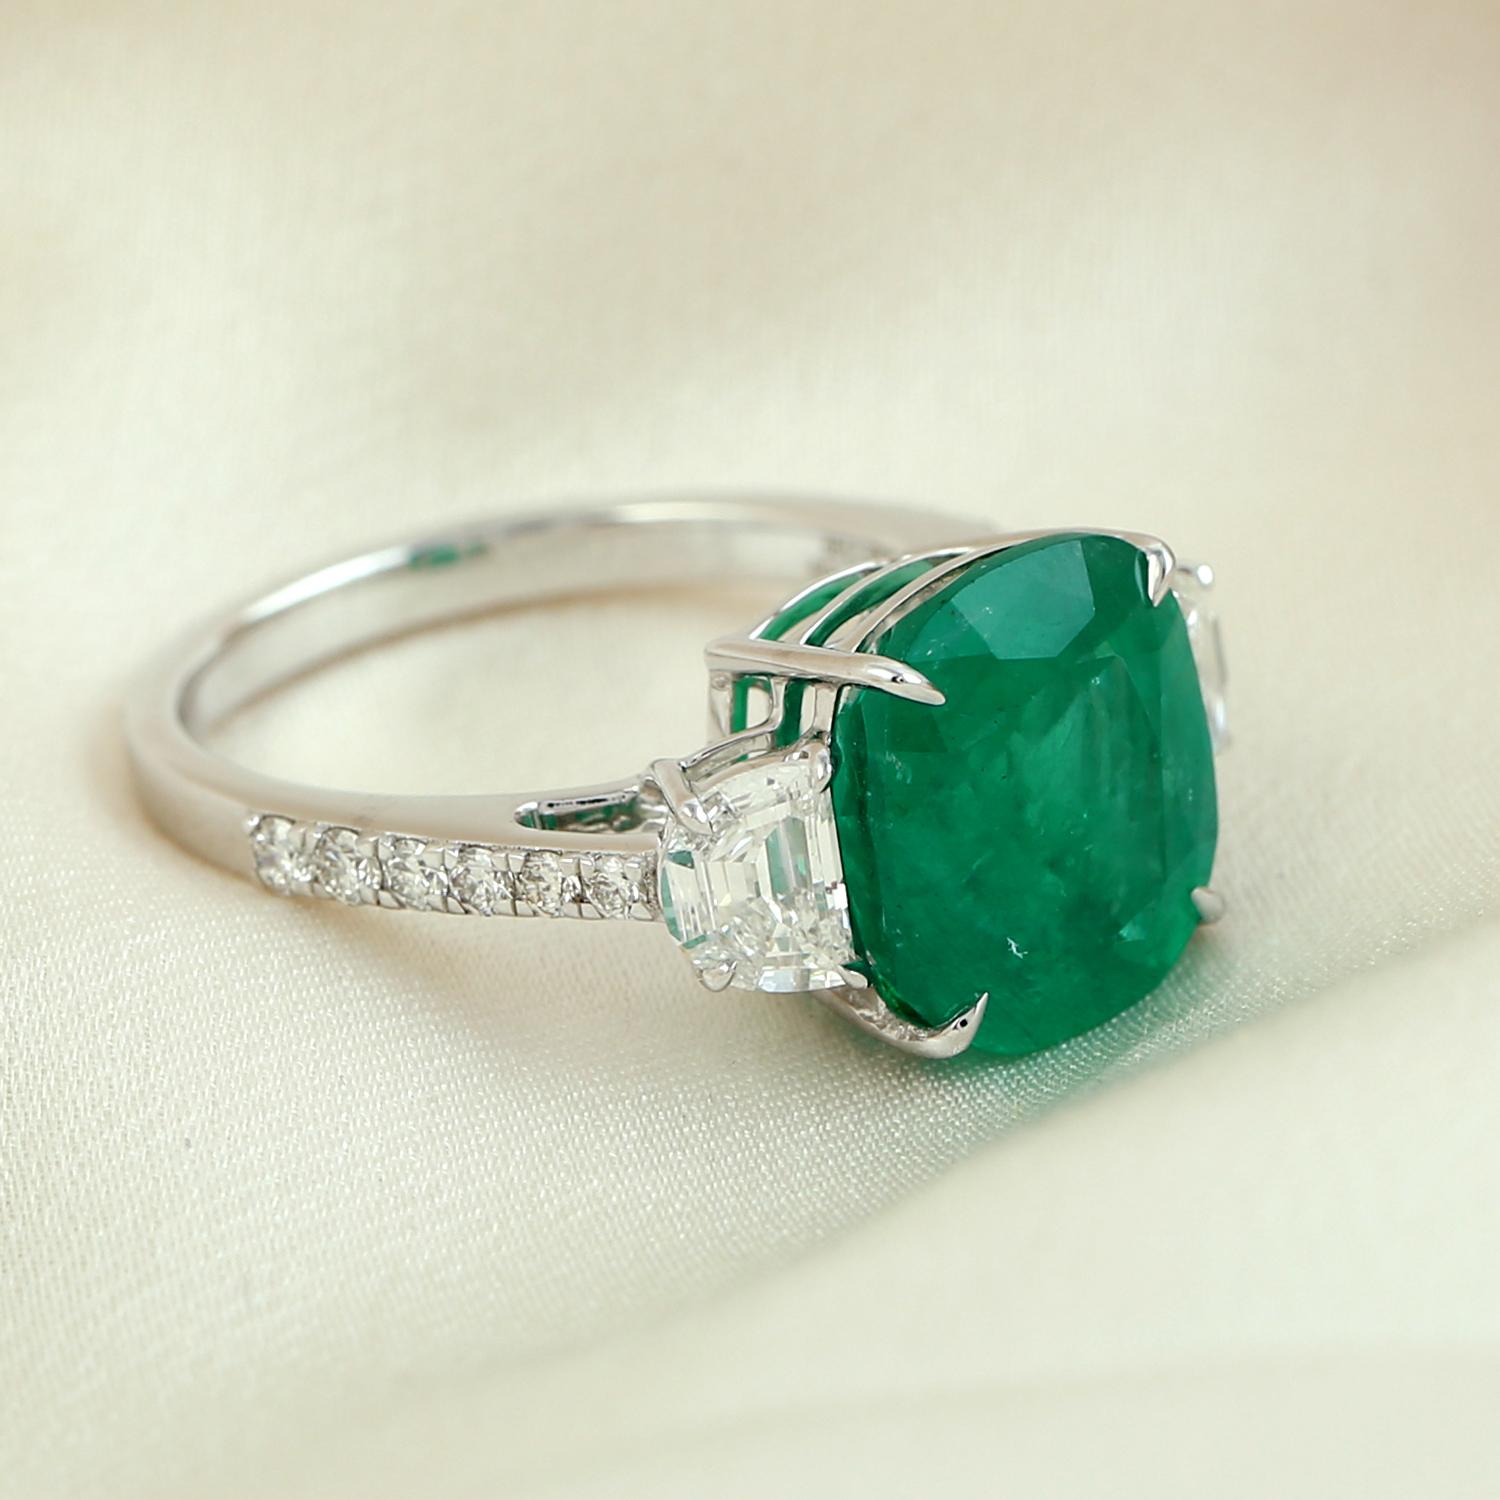 Mixed Cut Cushion Shaped Zambian Emerald Cocktail Ring With Diamonds For Sale